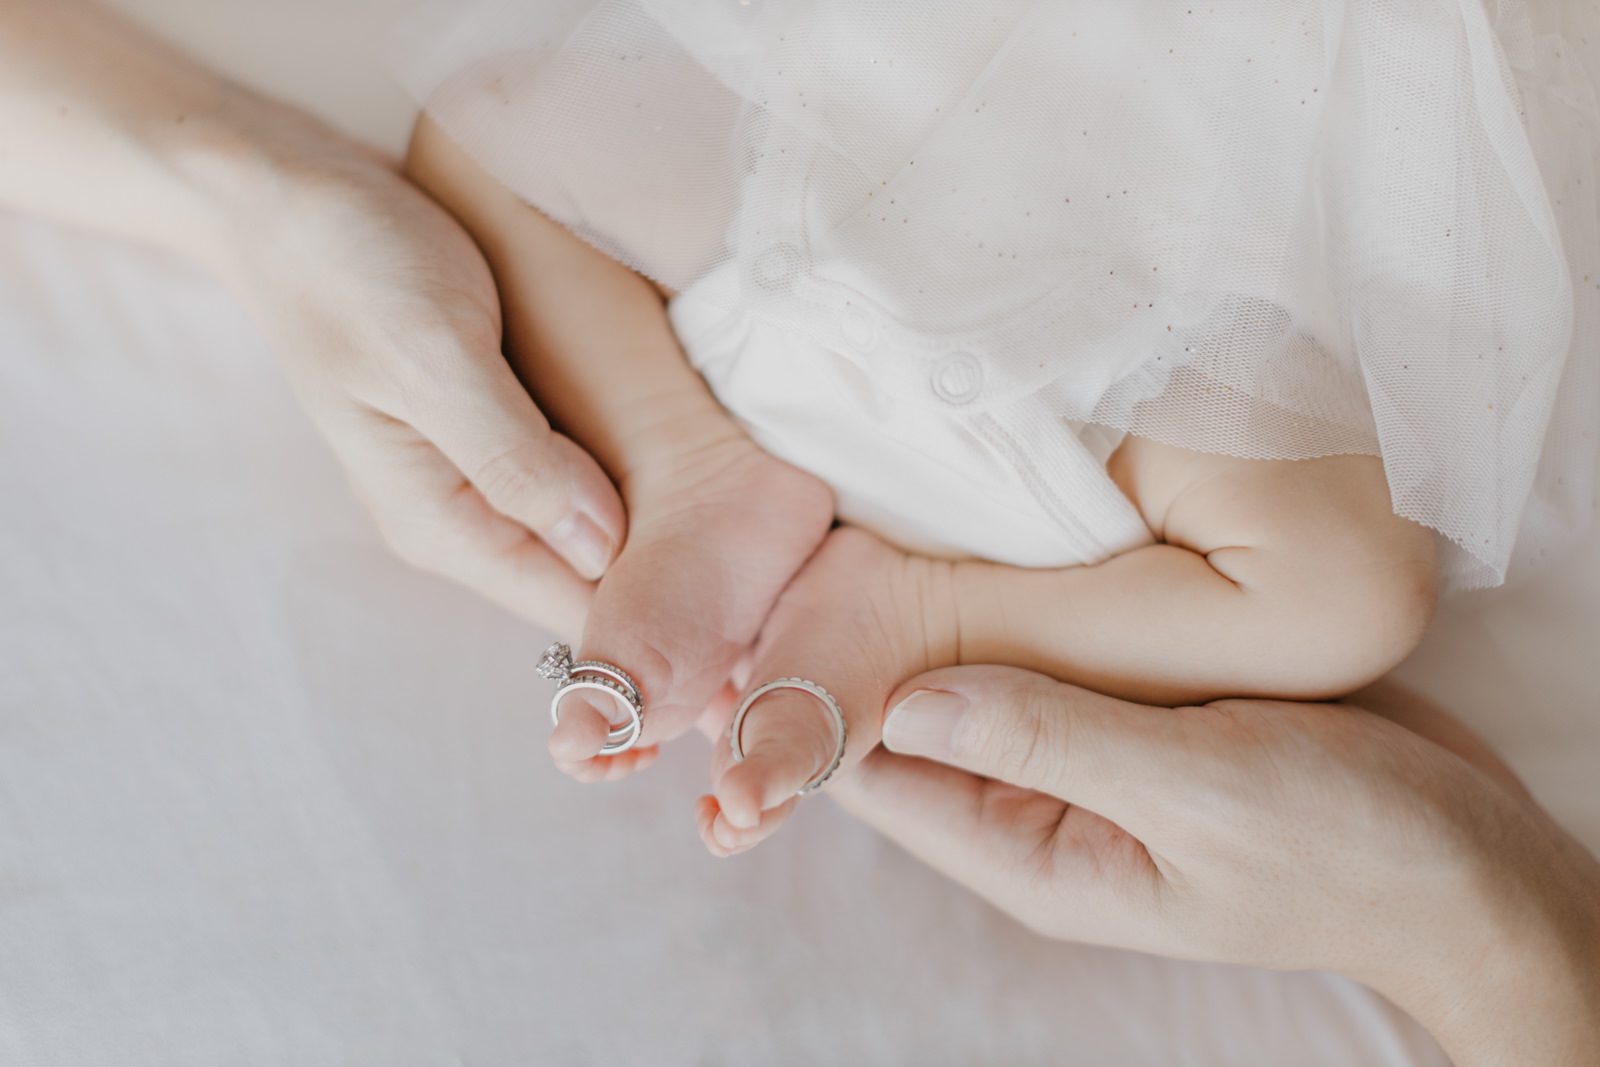 Little Kiko and her parents sharing a tender moment of love Newborn Photography Mini Session